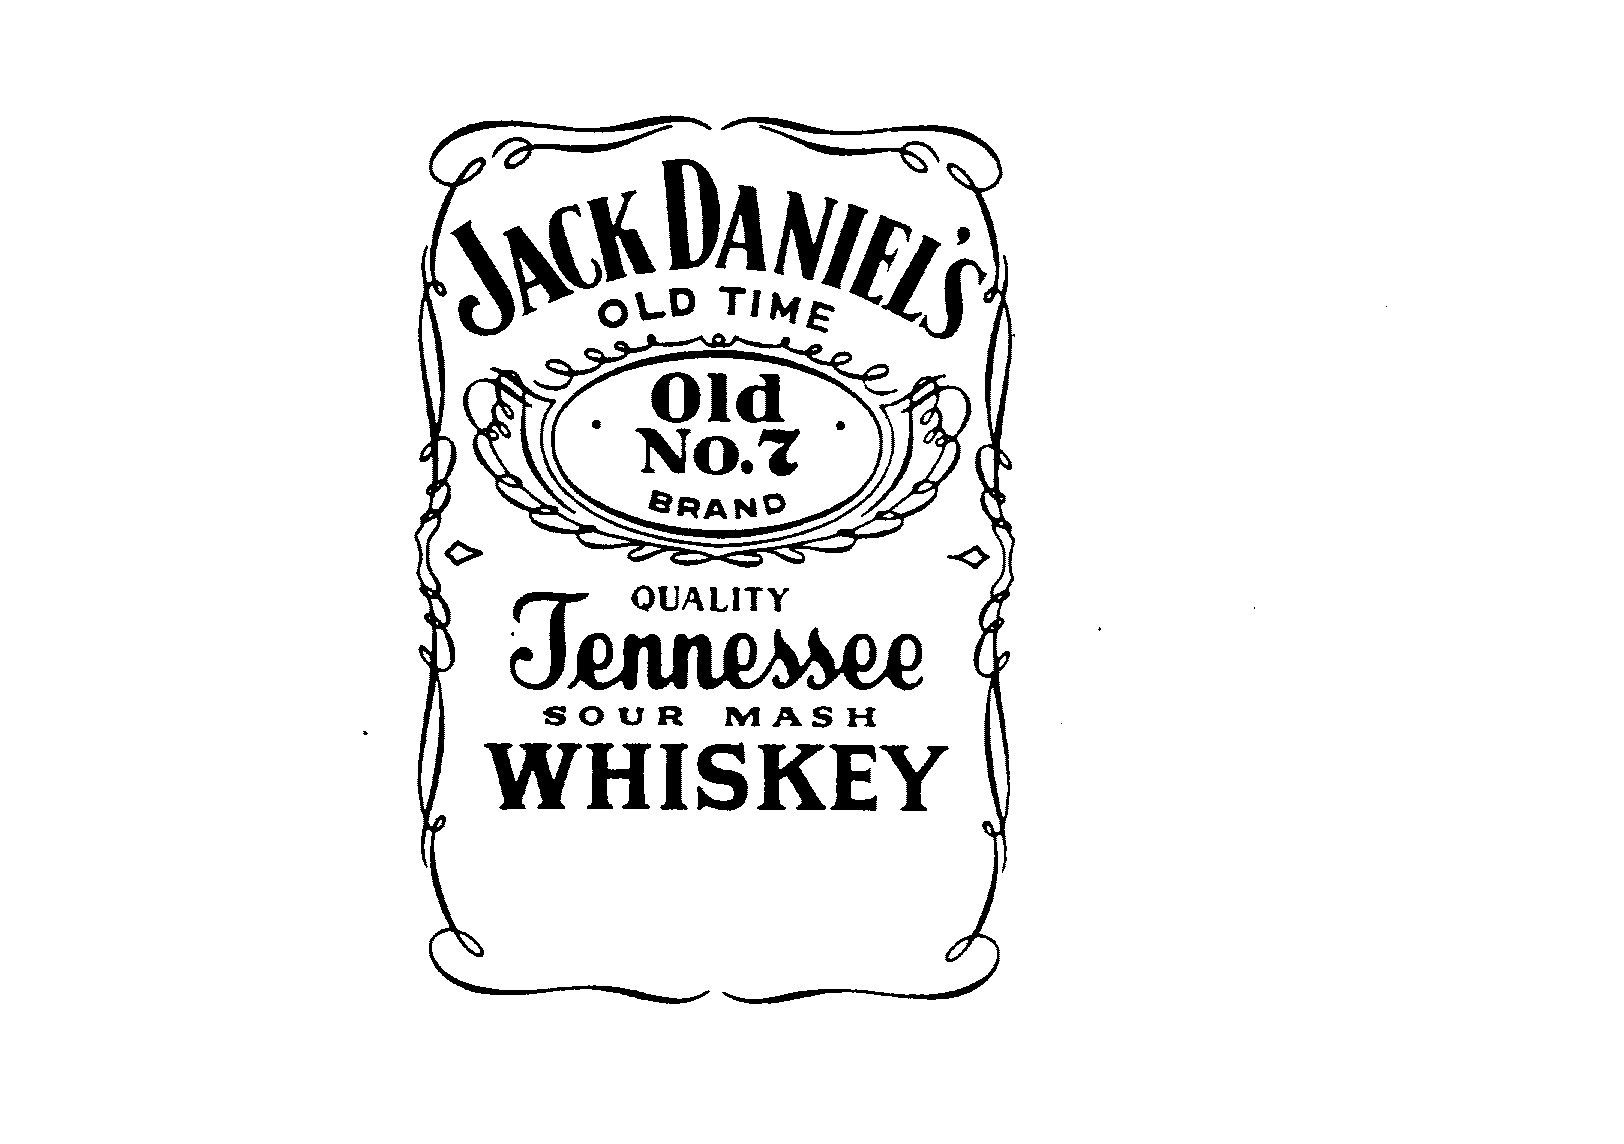  JACK DANIEL'S OLD TIME OLD NO. 7 BRAND QUALITY TENNESSEE SOUR MASH WHISKEY